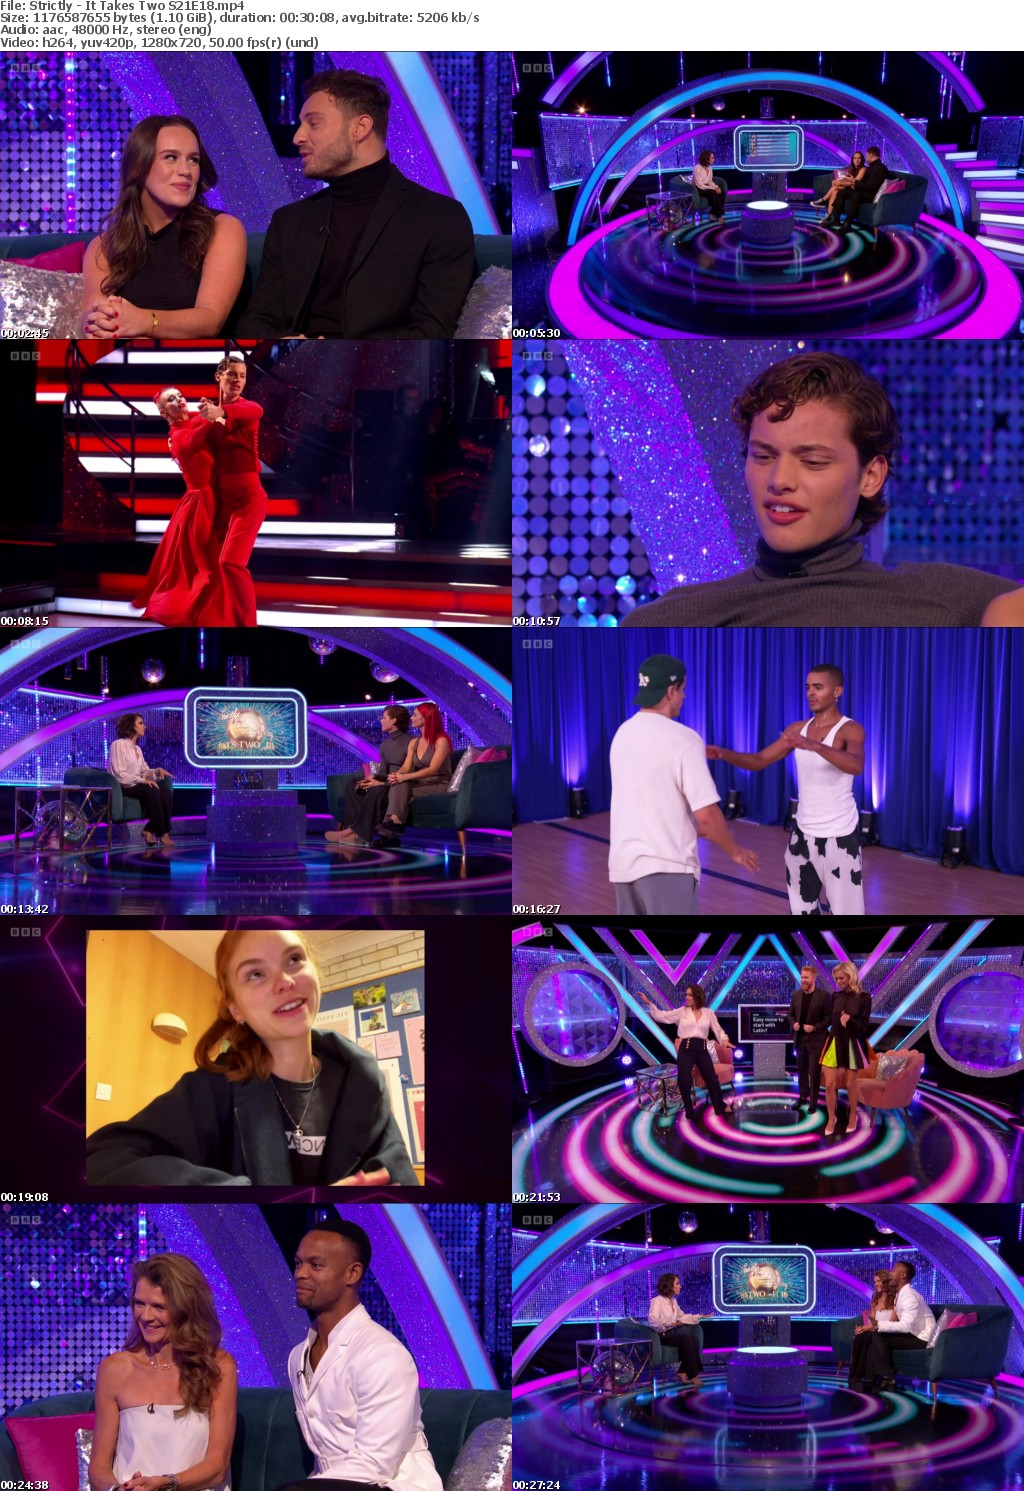 Strictly - It Takes Two S21E18 (1280x720p HD, 50fps, soft Eng subs)